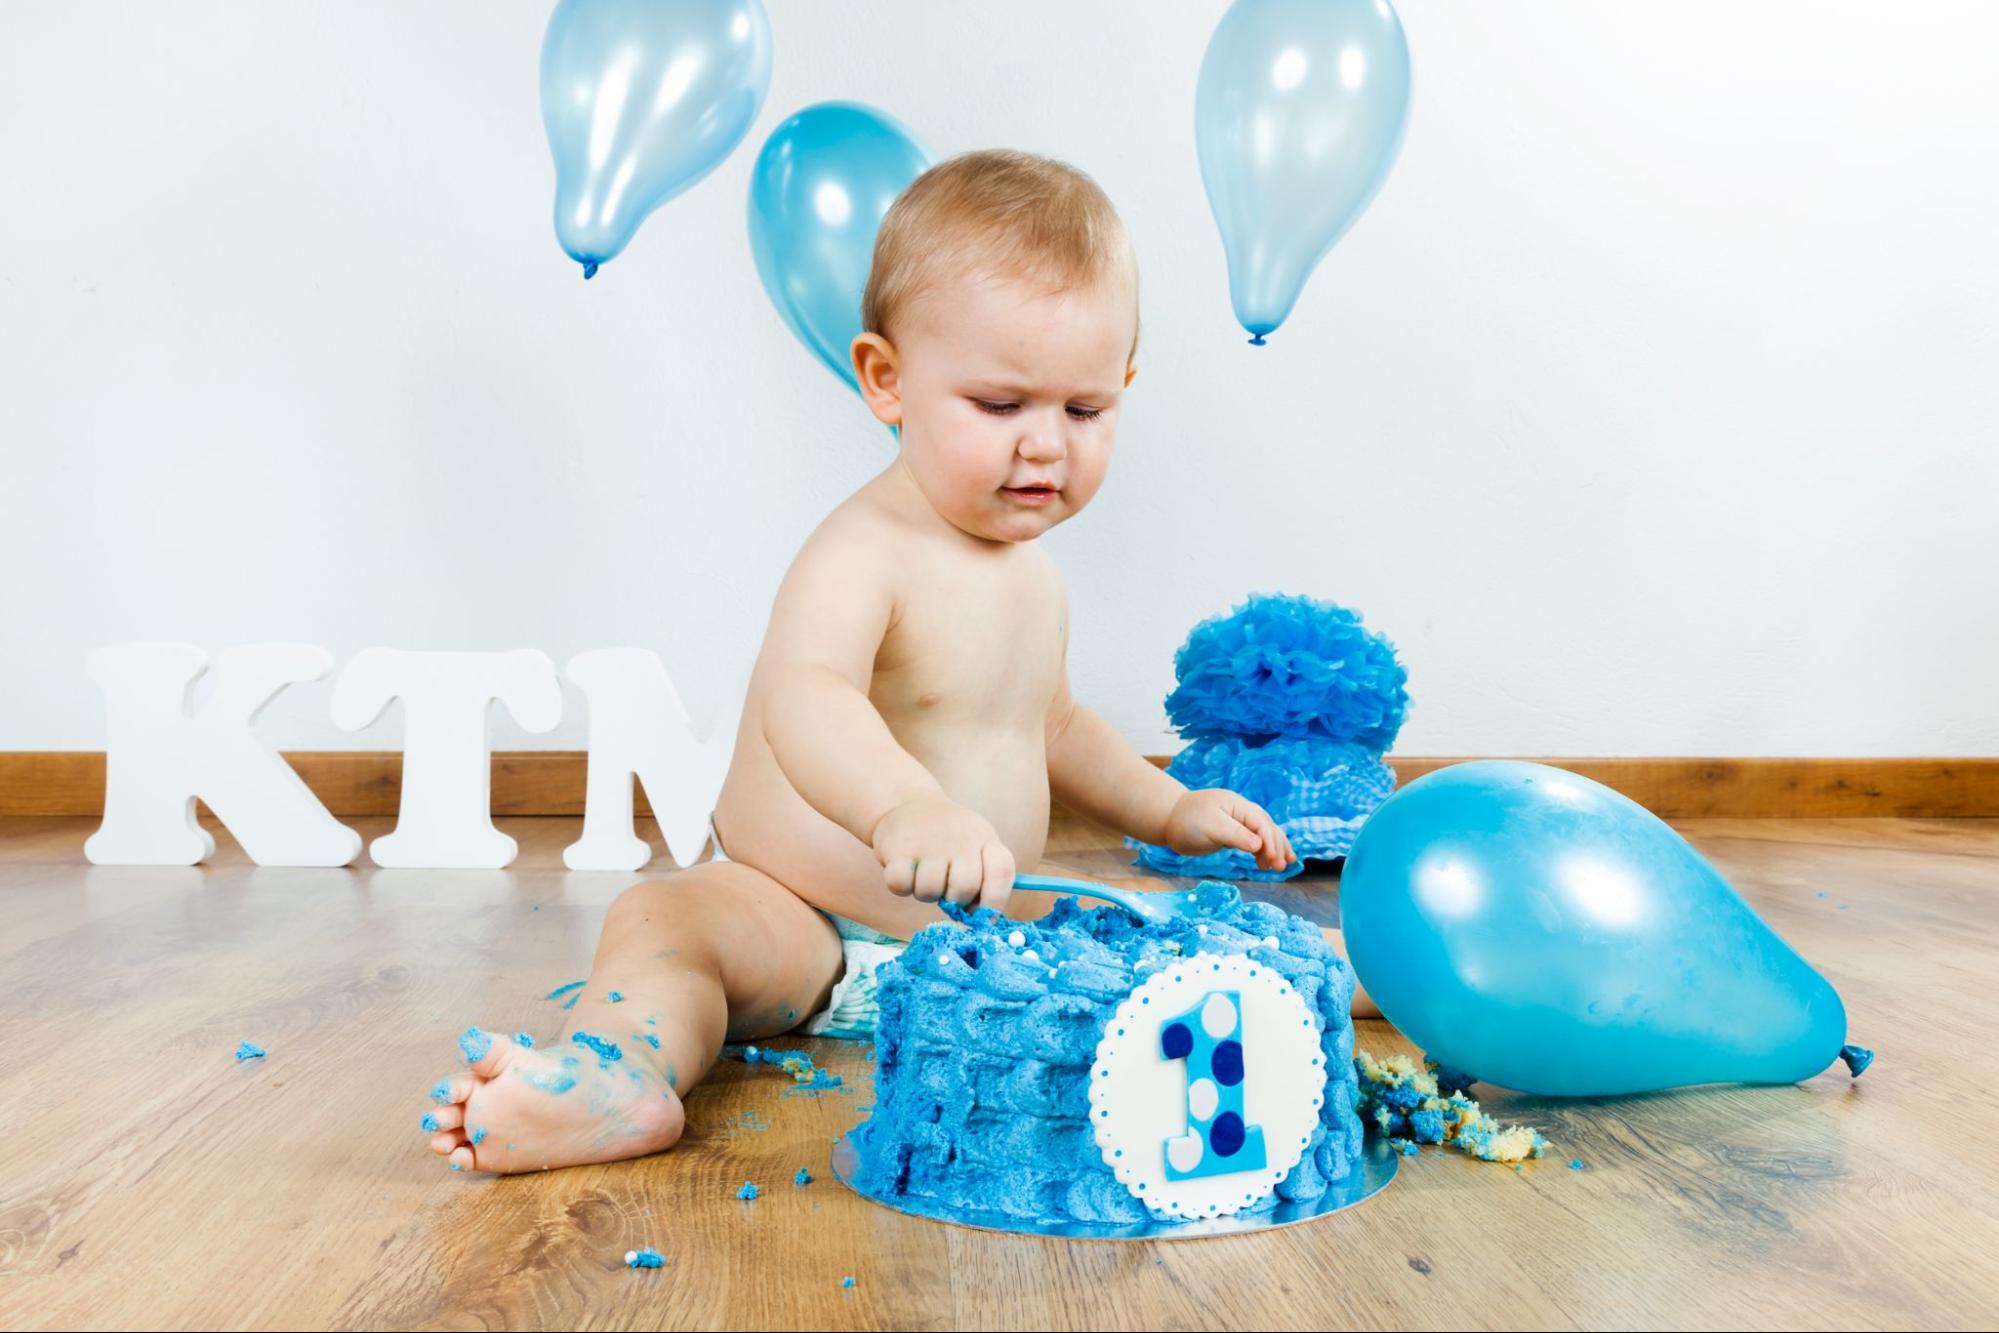 Baby with balloon backdrop, capturing whimsy and joyous celebration.